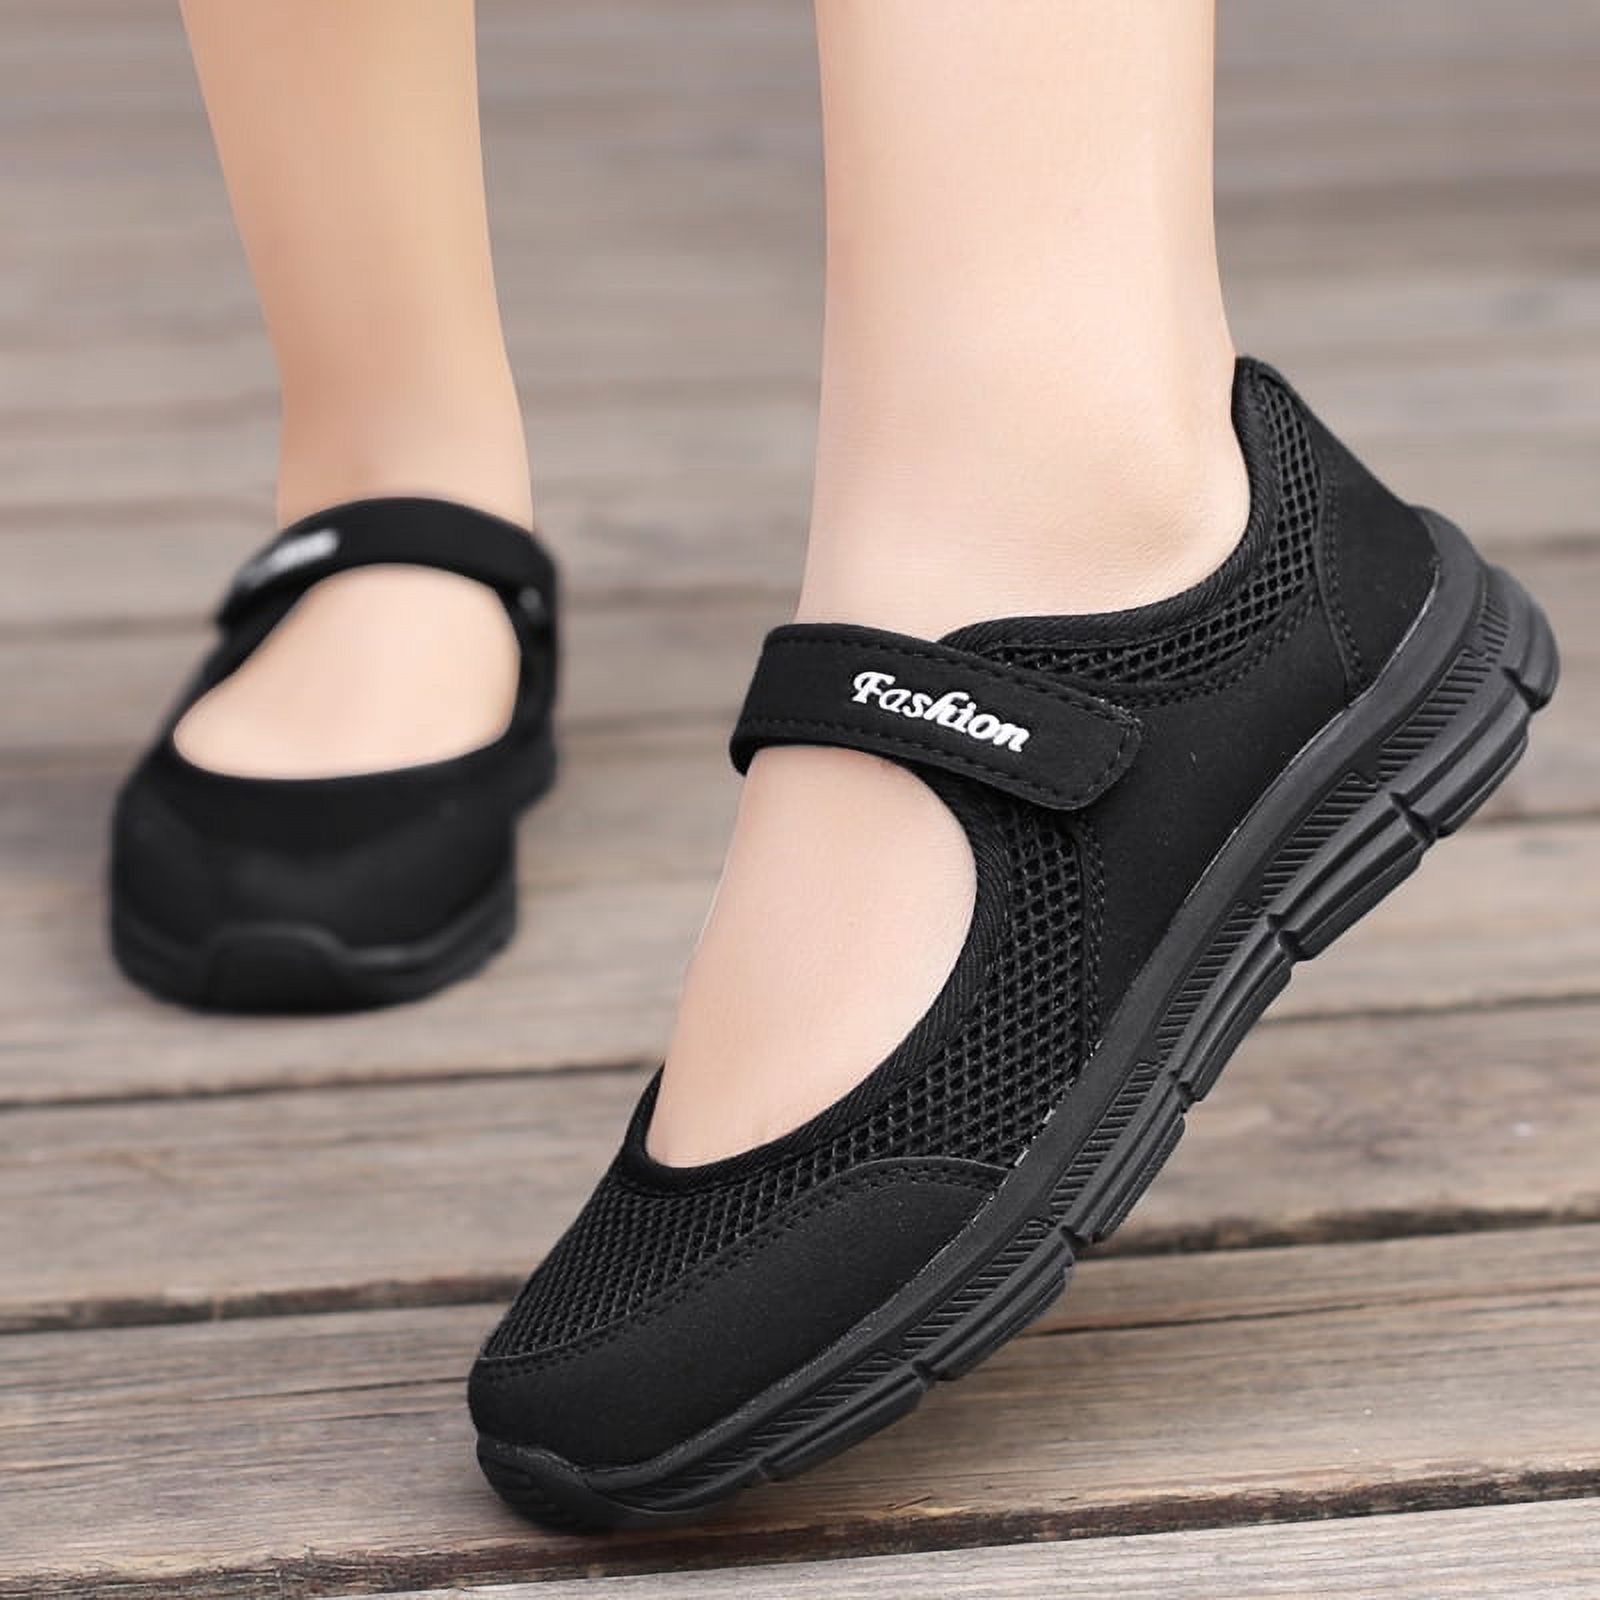 Women's Extra Wide Diabetic Edema Shoes with Fully Adjustable Closures ...